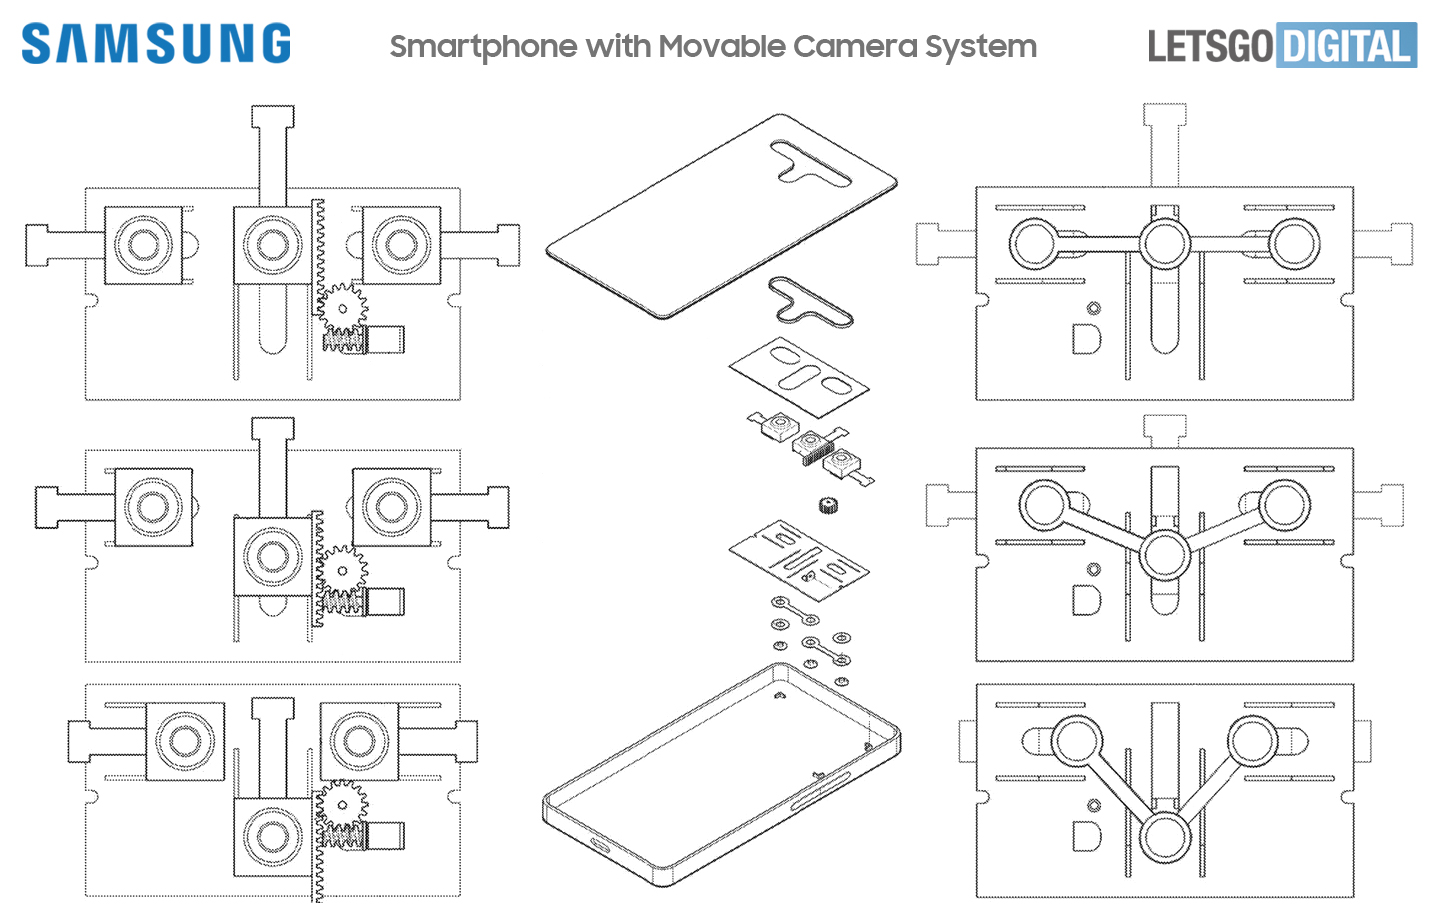 Samsung Movable Camera Variable Aperture Field of View FoV Patent 01